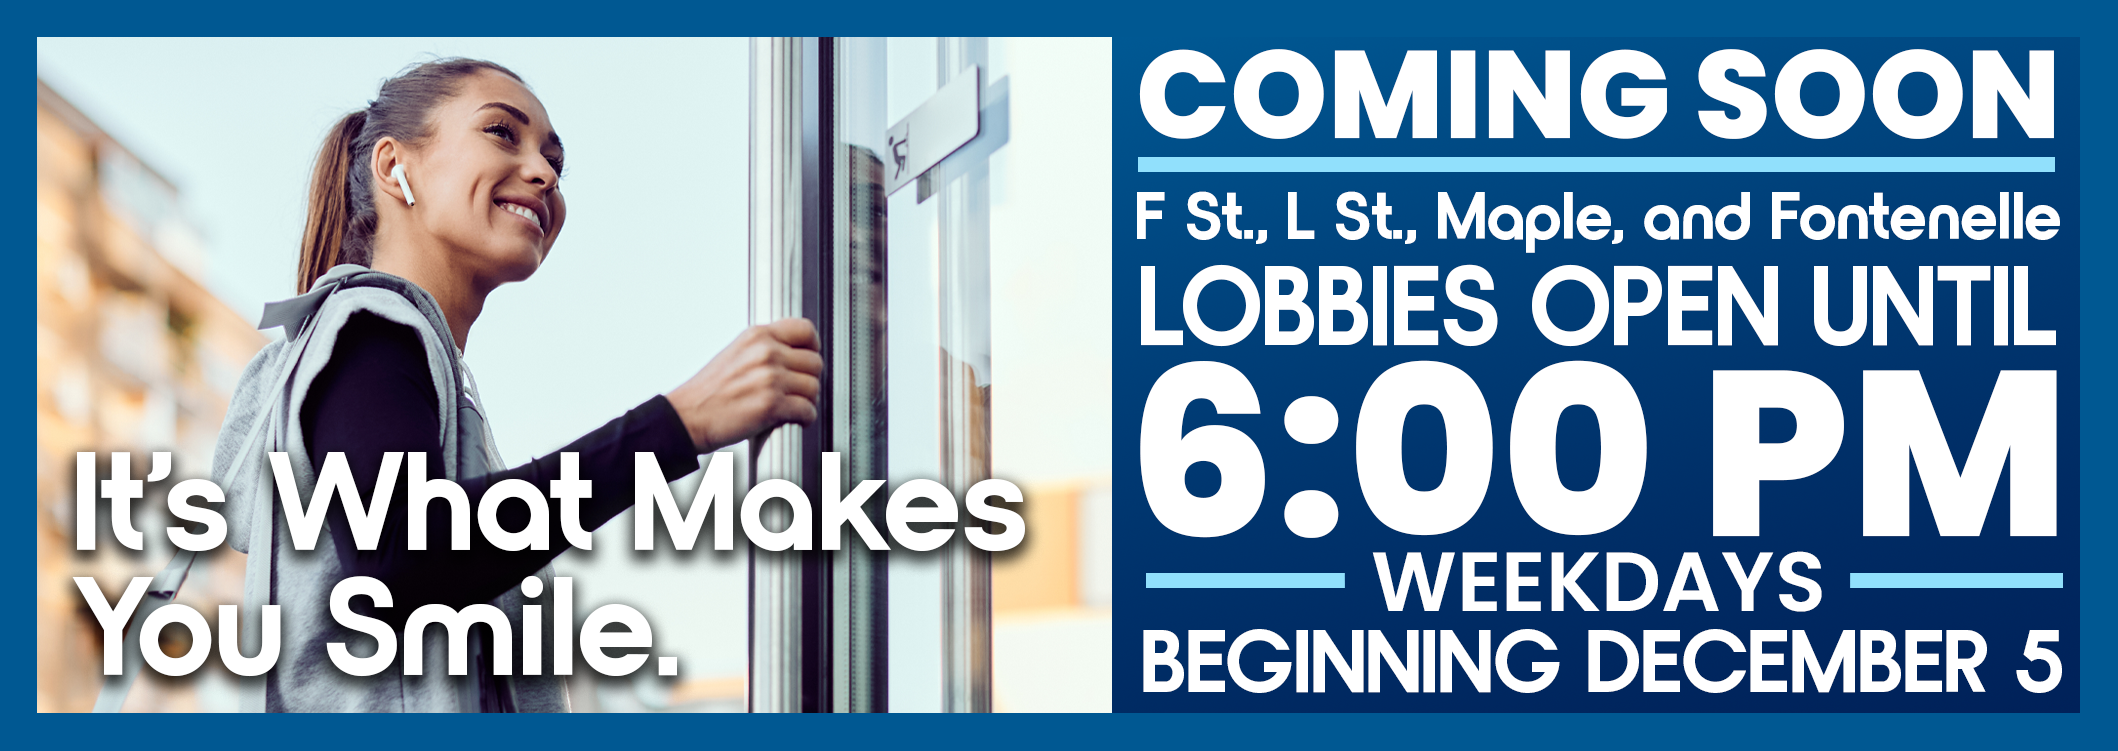 Coming Soon! F St., L St., Maple & Fontenelle lobbies open until 6:00 p.m. weekdays beginning December 5th.